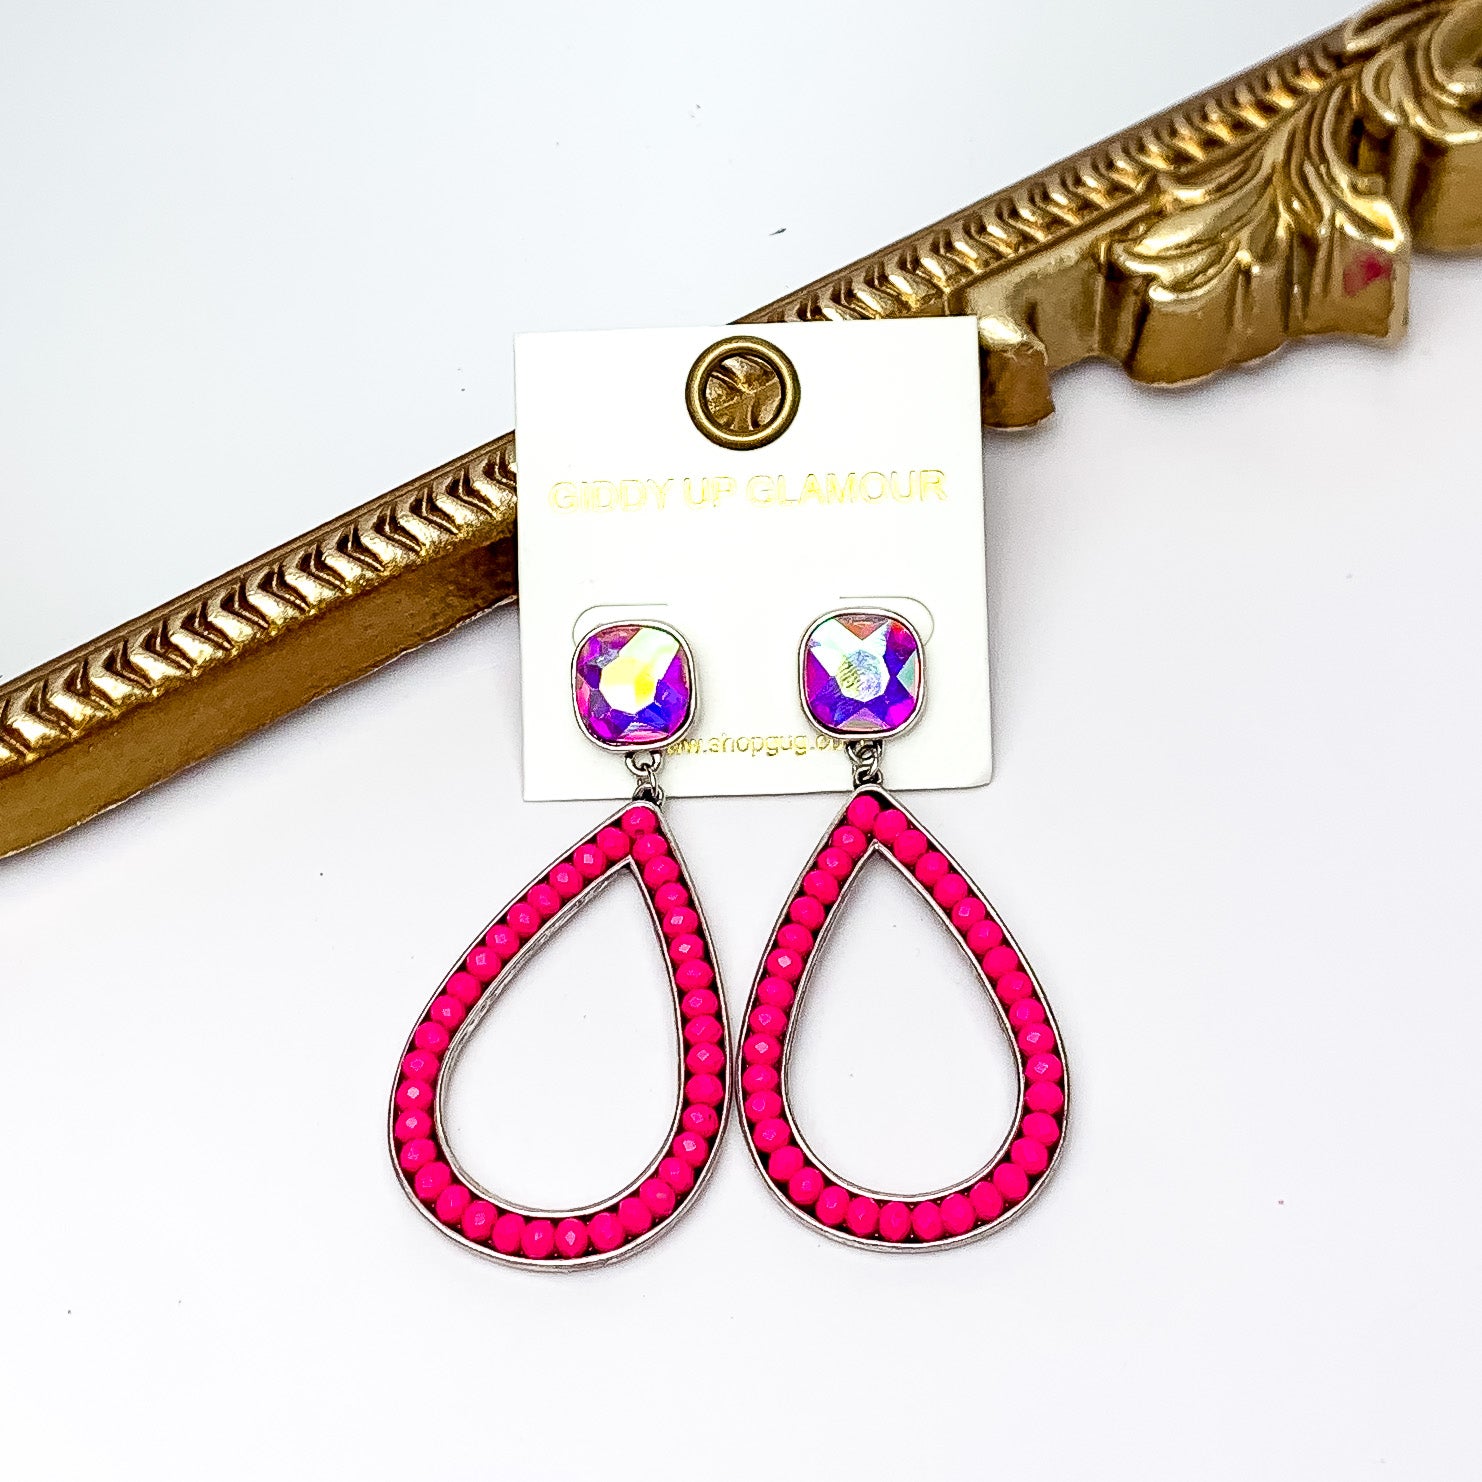 Glass Beaded Teardrop Post Earrings with AB Crystal in Pink. Pictured on a white background with a gold frame behind the earrings.